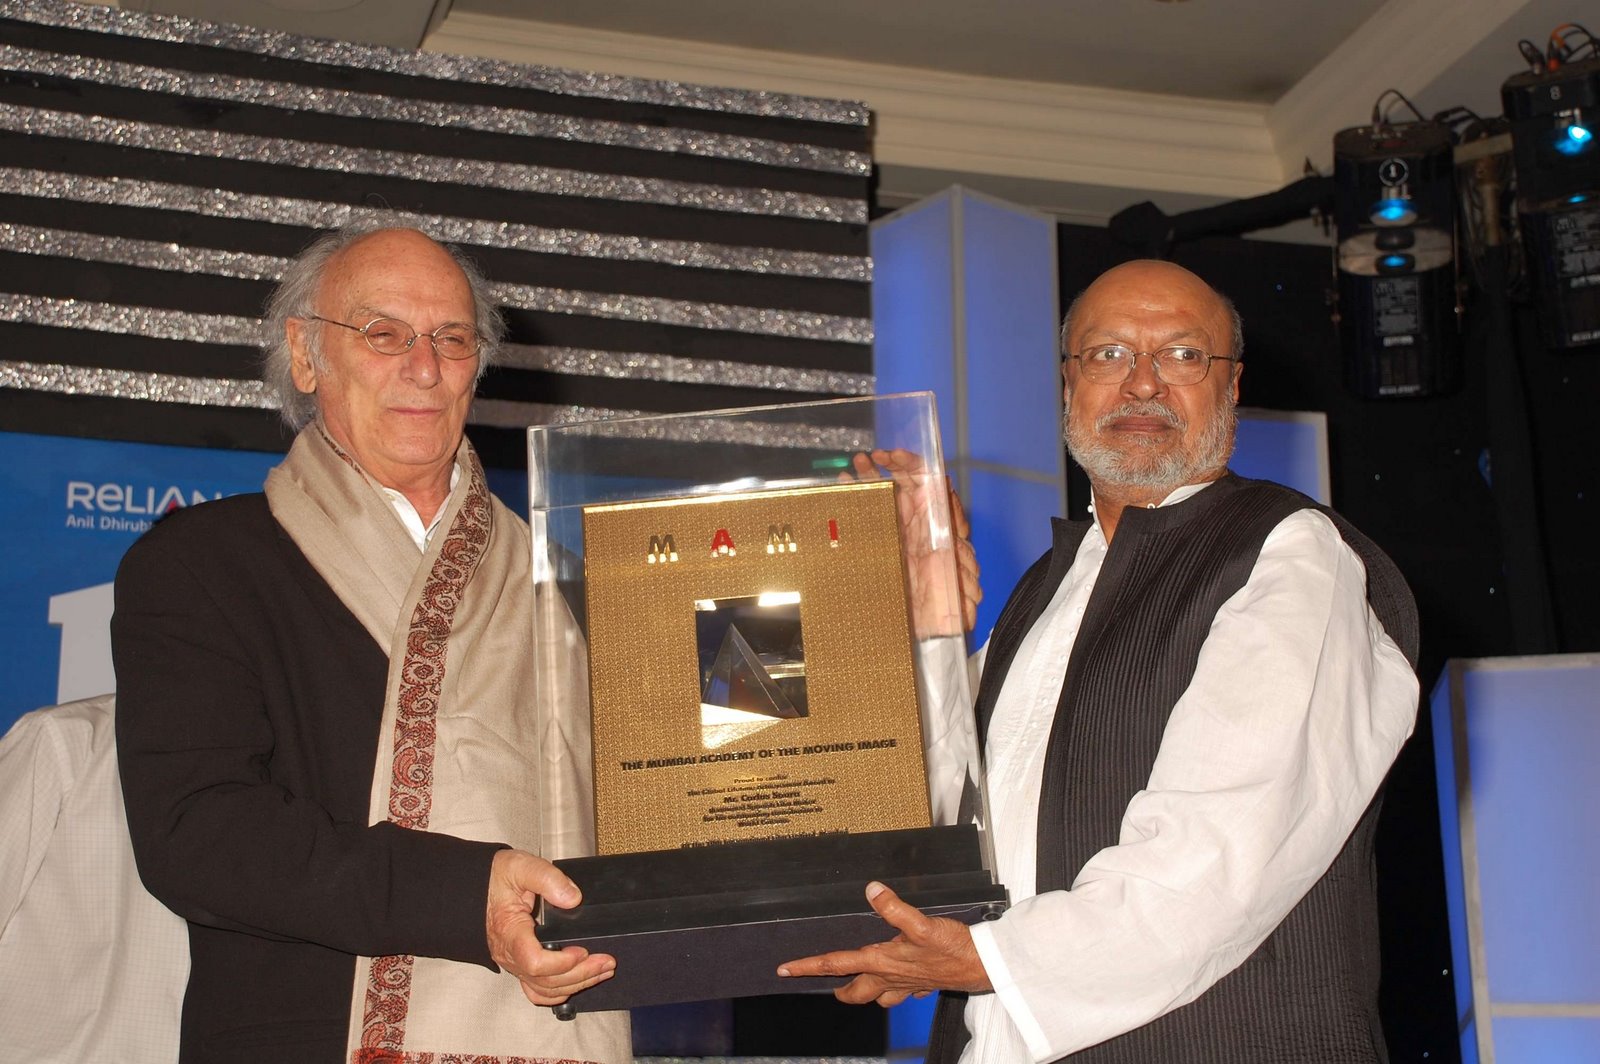 [Global+Lifetime+Achievement+Award+was+conferred+on+Carlos+Saura,+the+renowned+Spanish+director+who+was+in+Mumbai+to+presided+the+function.award+given+by+MAMI+CHAIRMAN+Mr.Shyam+Benegal.JPG]